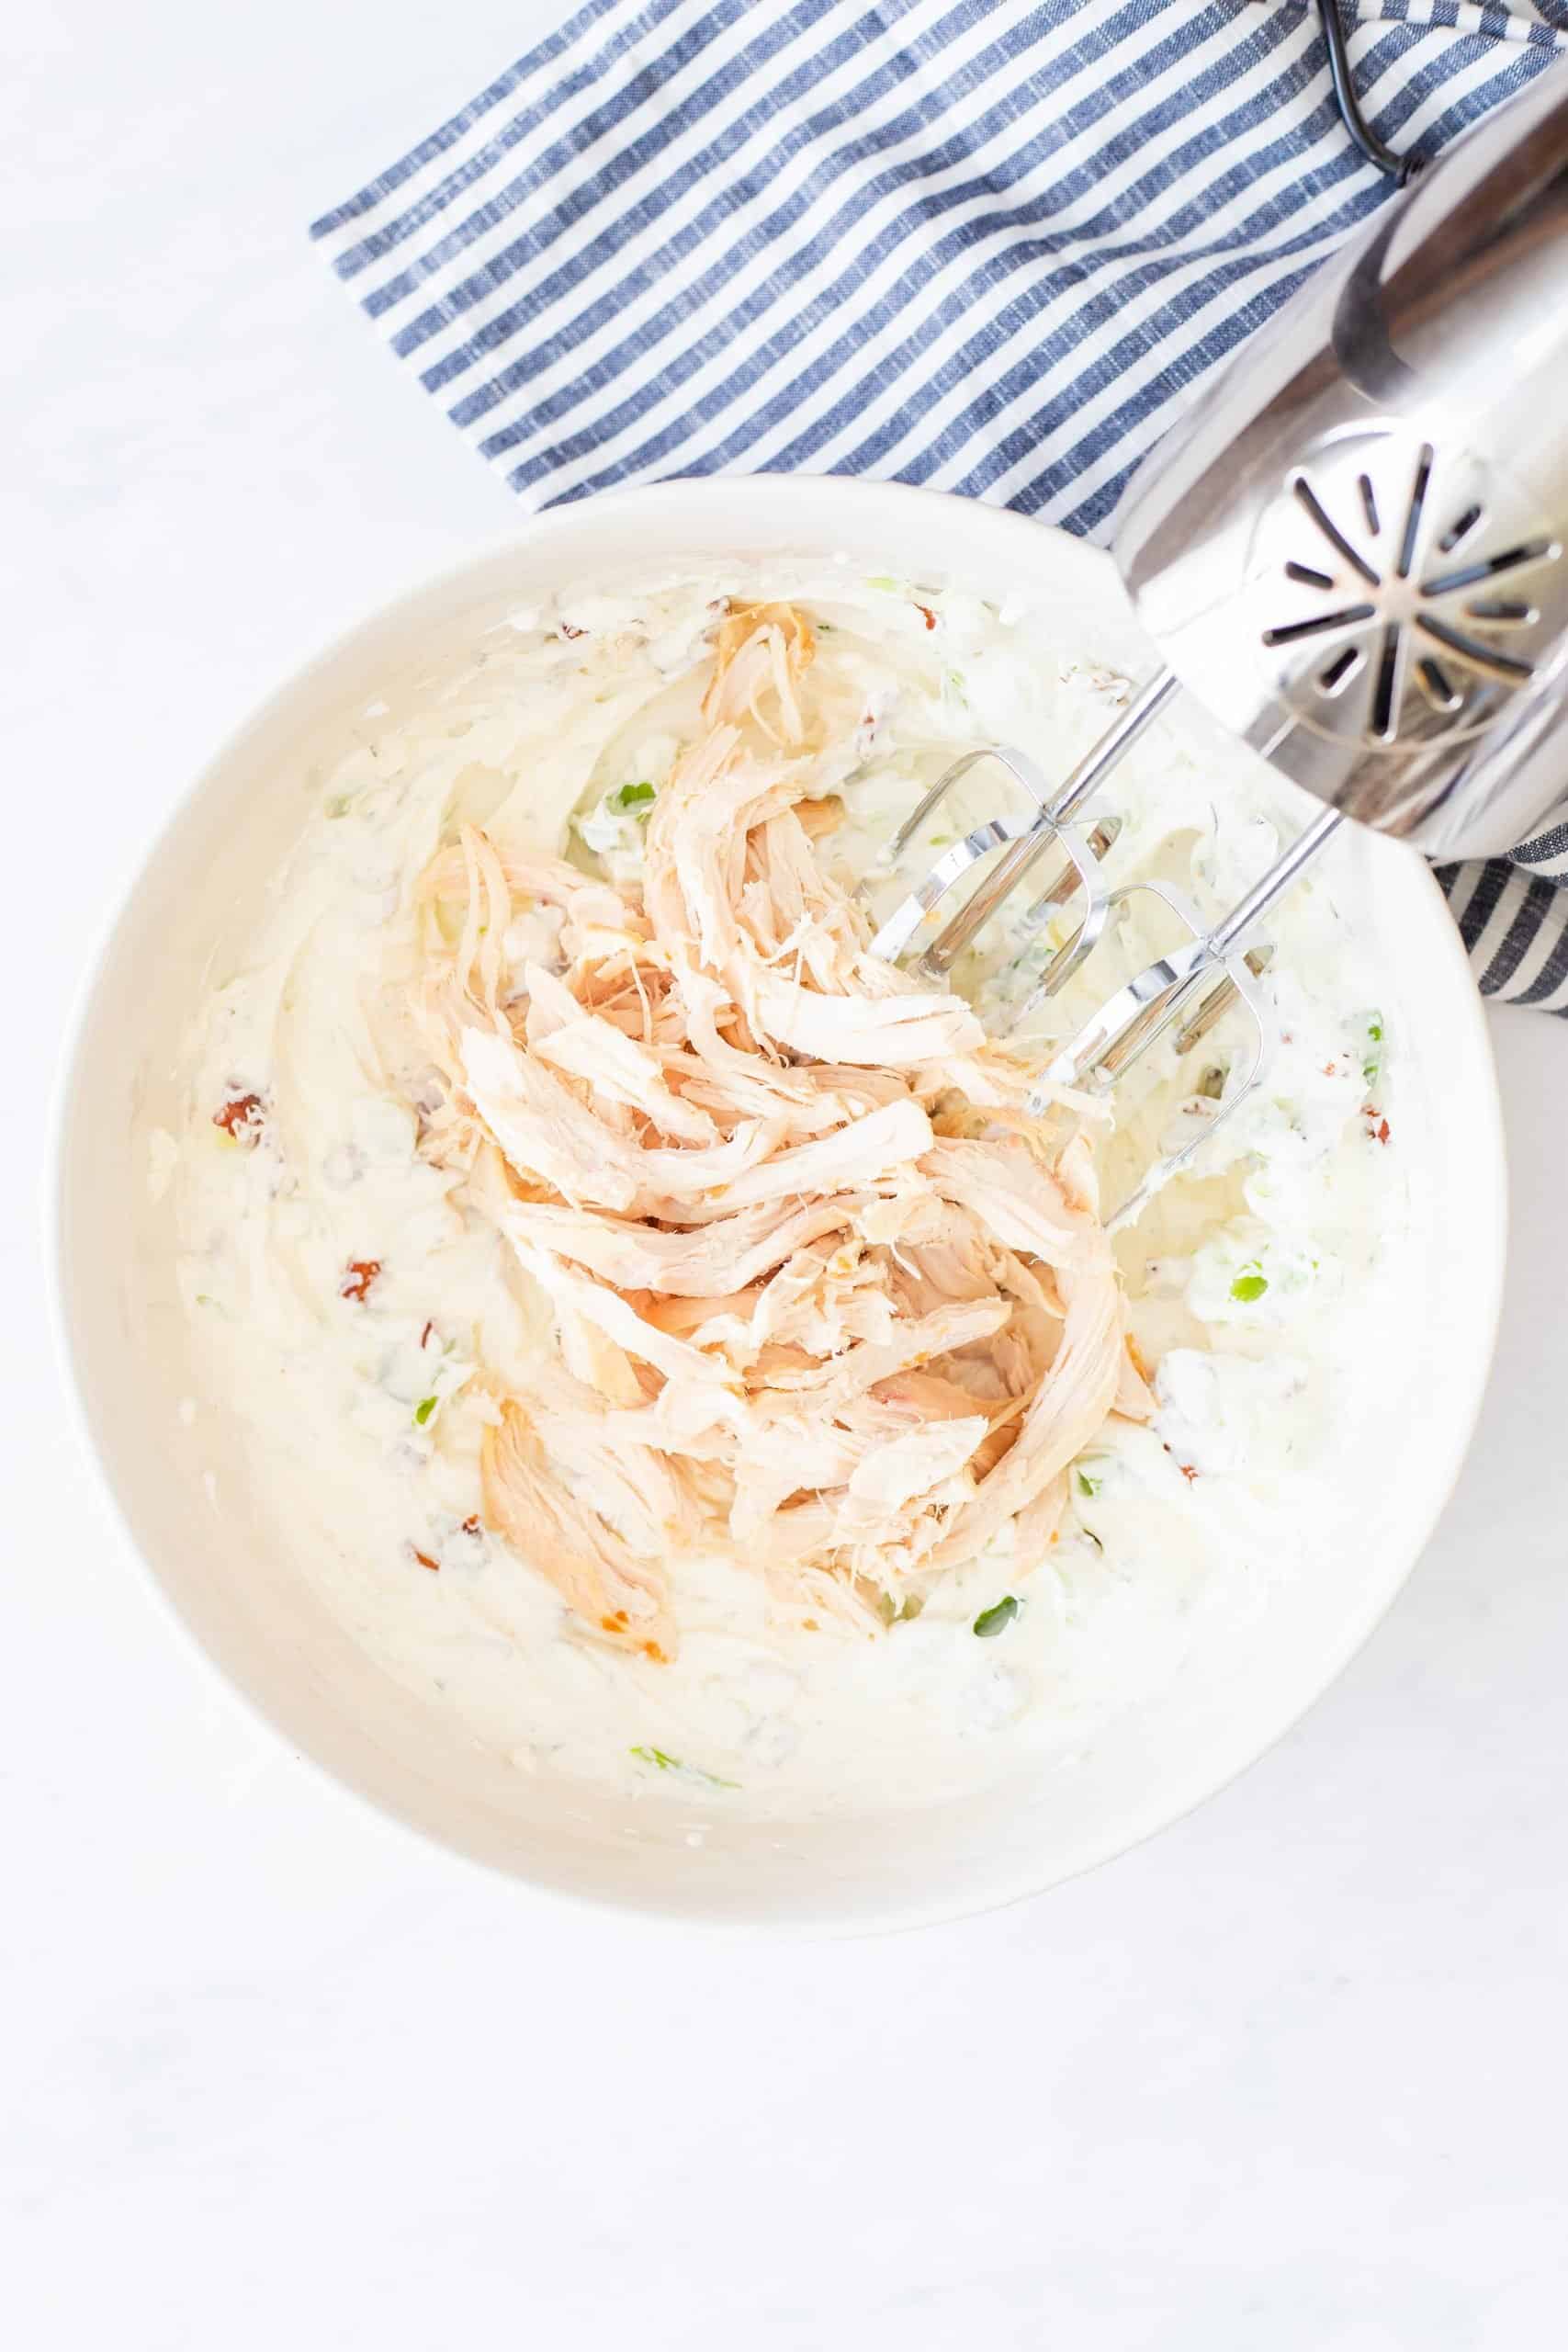 shredded chicken added to cream cheese mixture in a bowl.